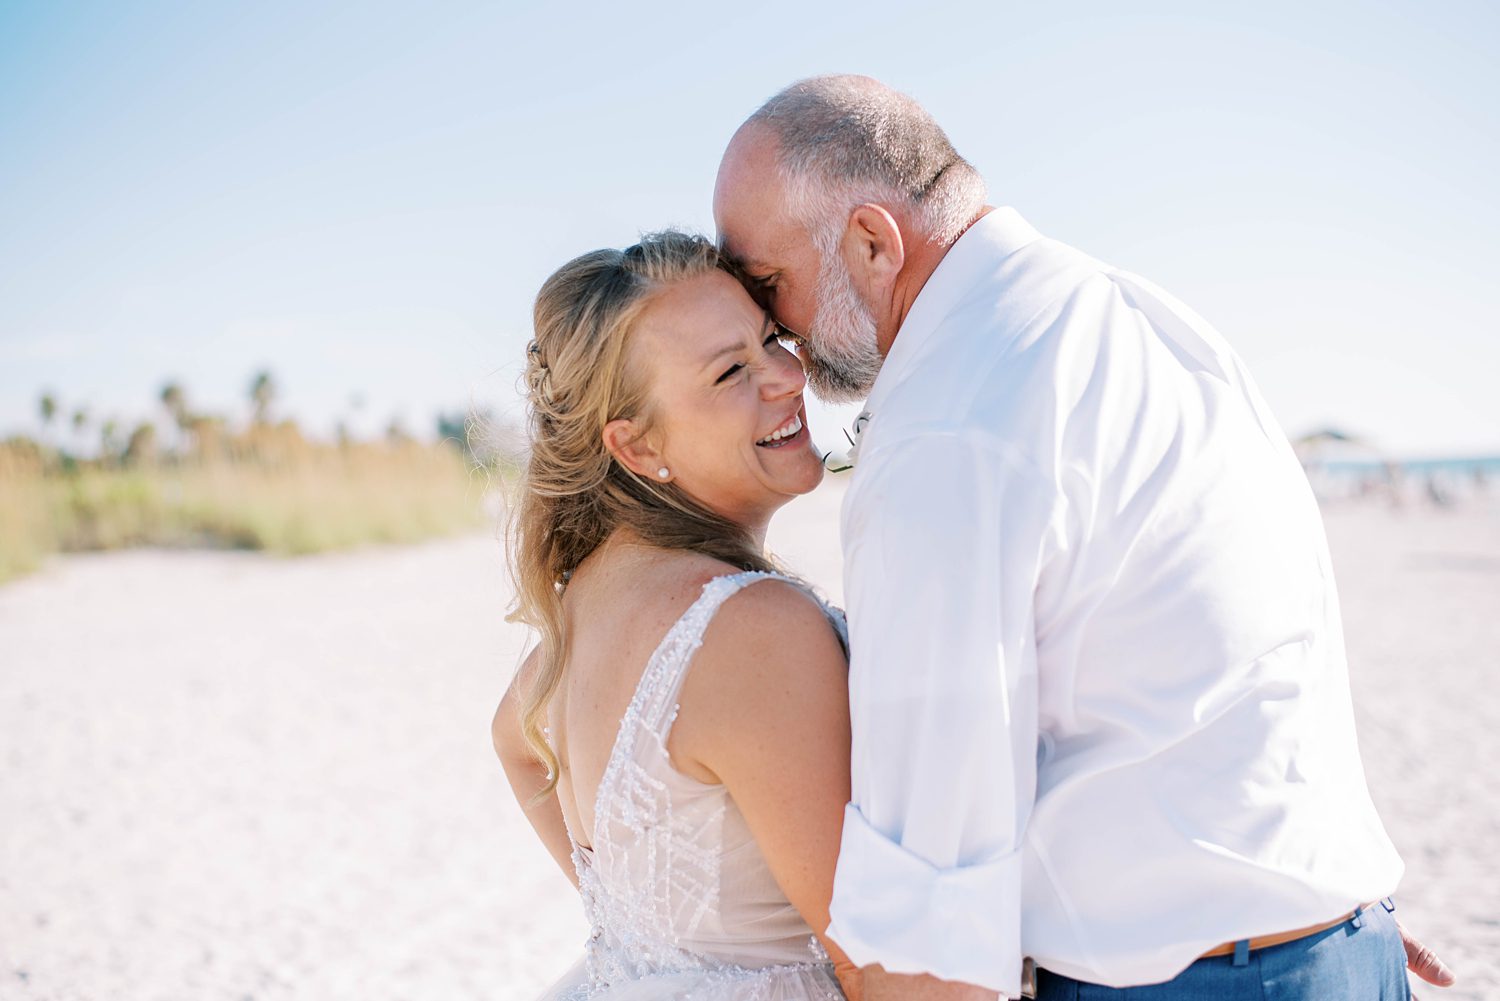 groom leans into bride's cheek making her laugh on beach wedding day